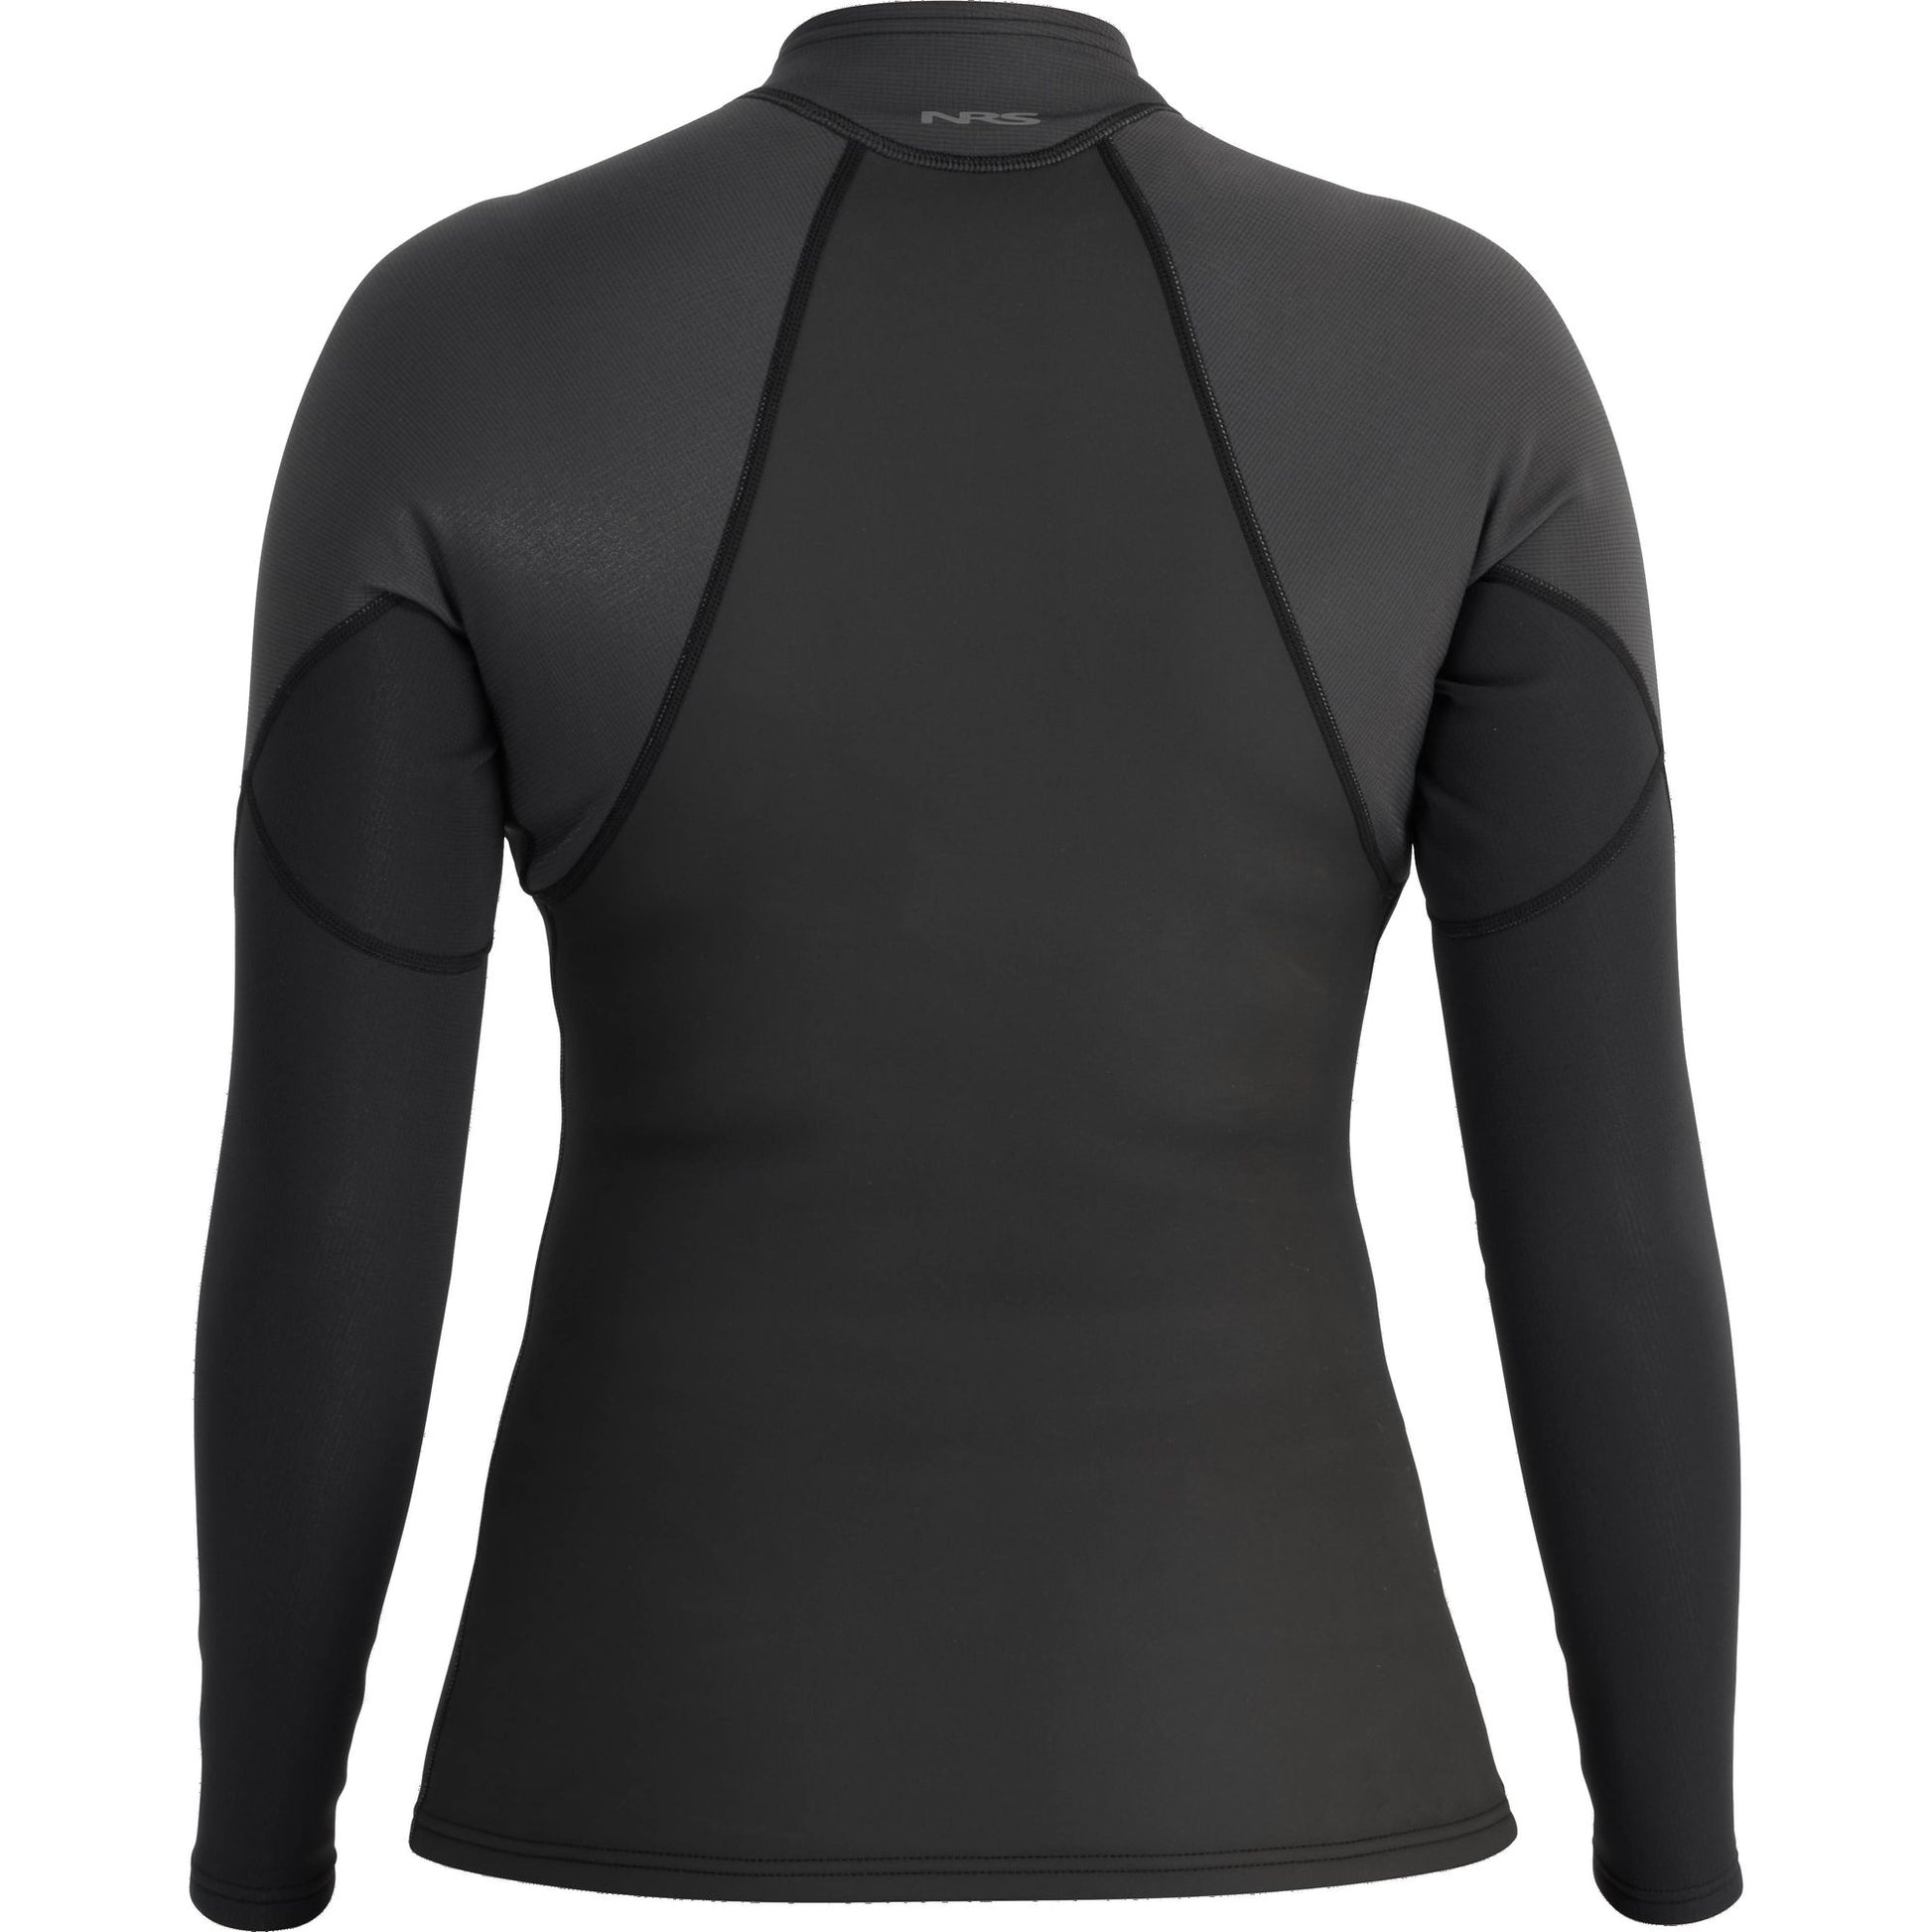 The back view of an NRS women's Hydroskin 1.0 Long Sleeve Shirt.